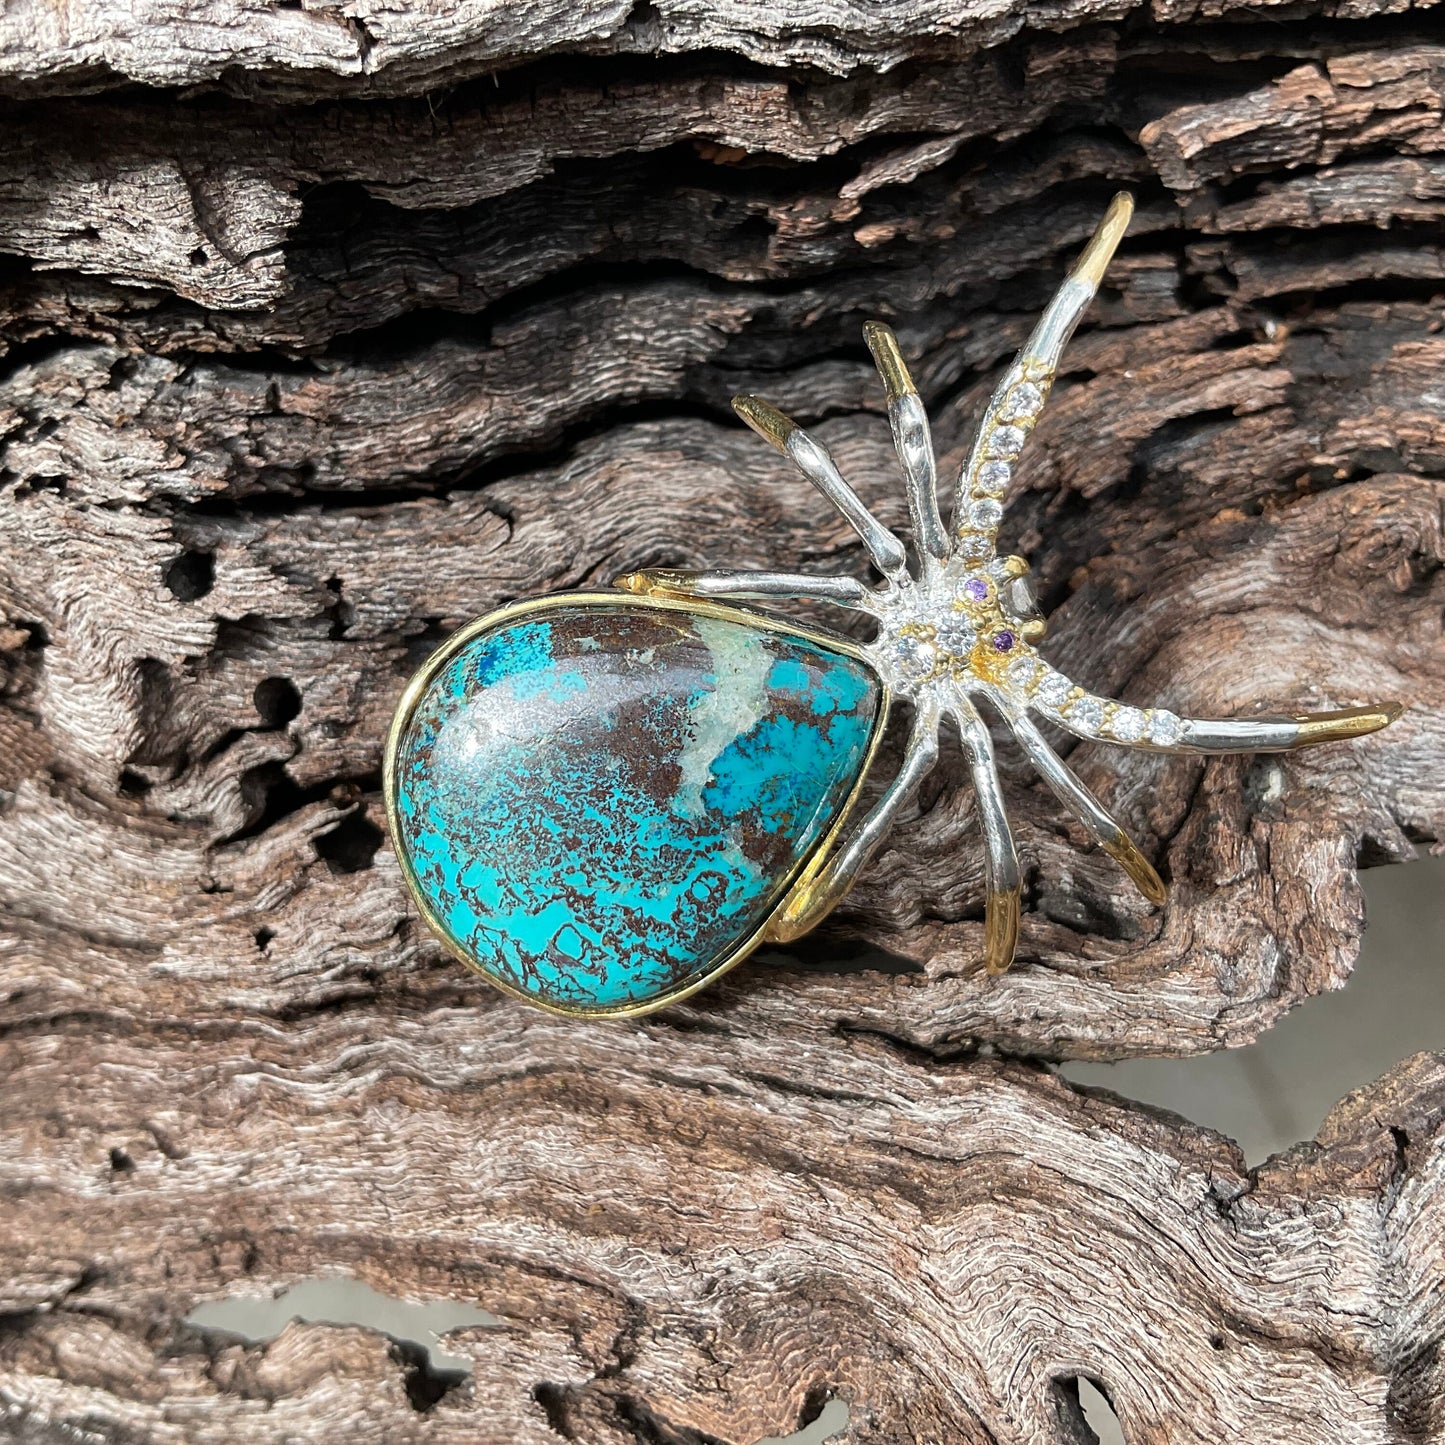 Handmade Sterling Silver modernist spider Brooch Pin turquoise